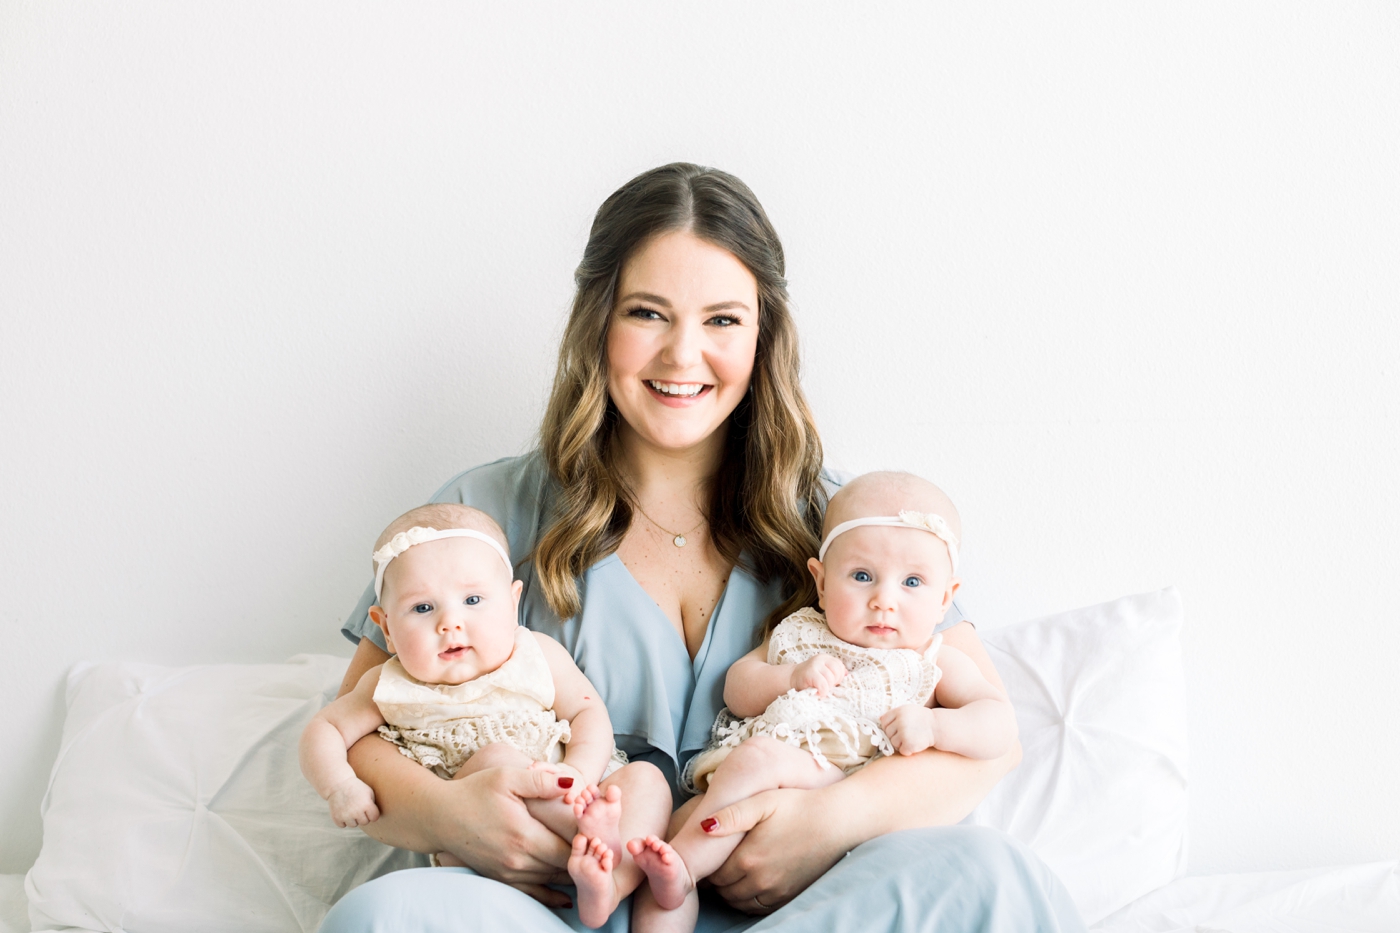 Mom holding twin girls and smiling at camera. Photo by Austin family photographer, Sana Ahmed Photography.